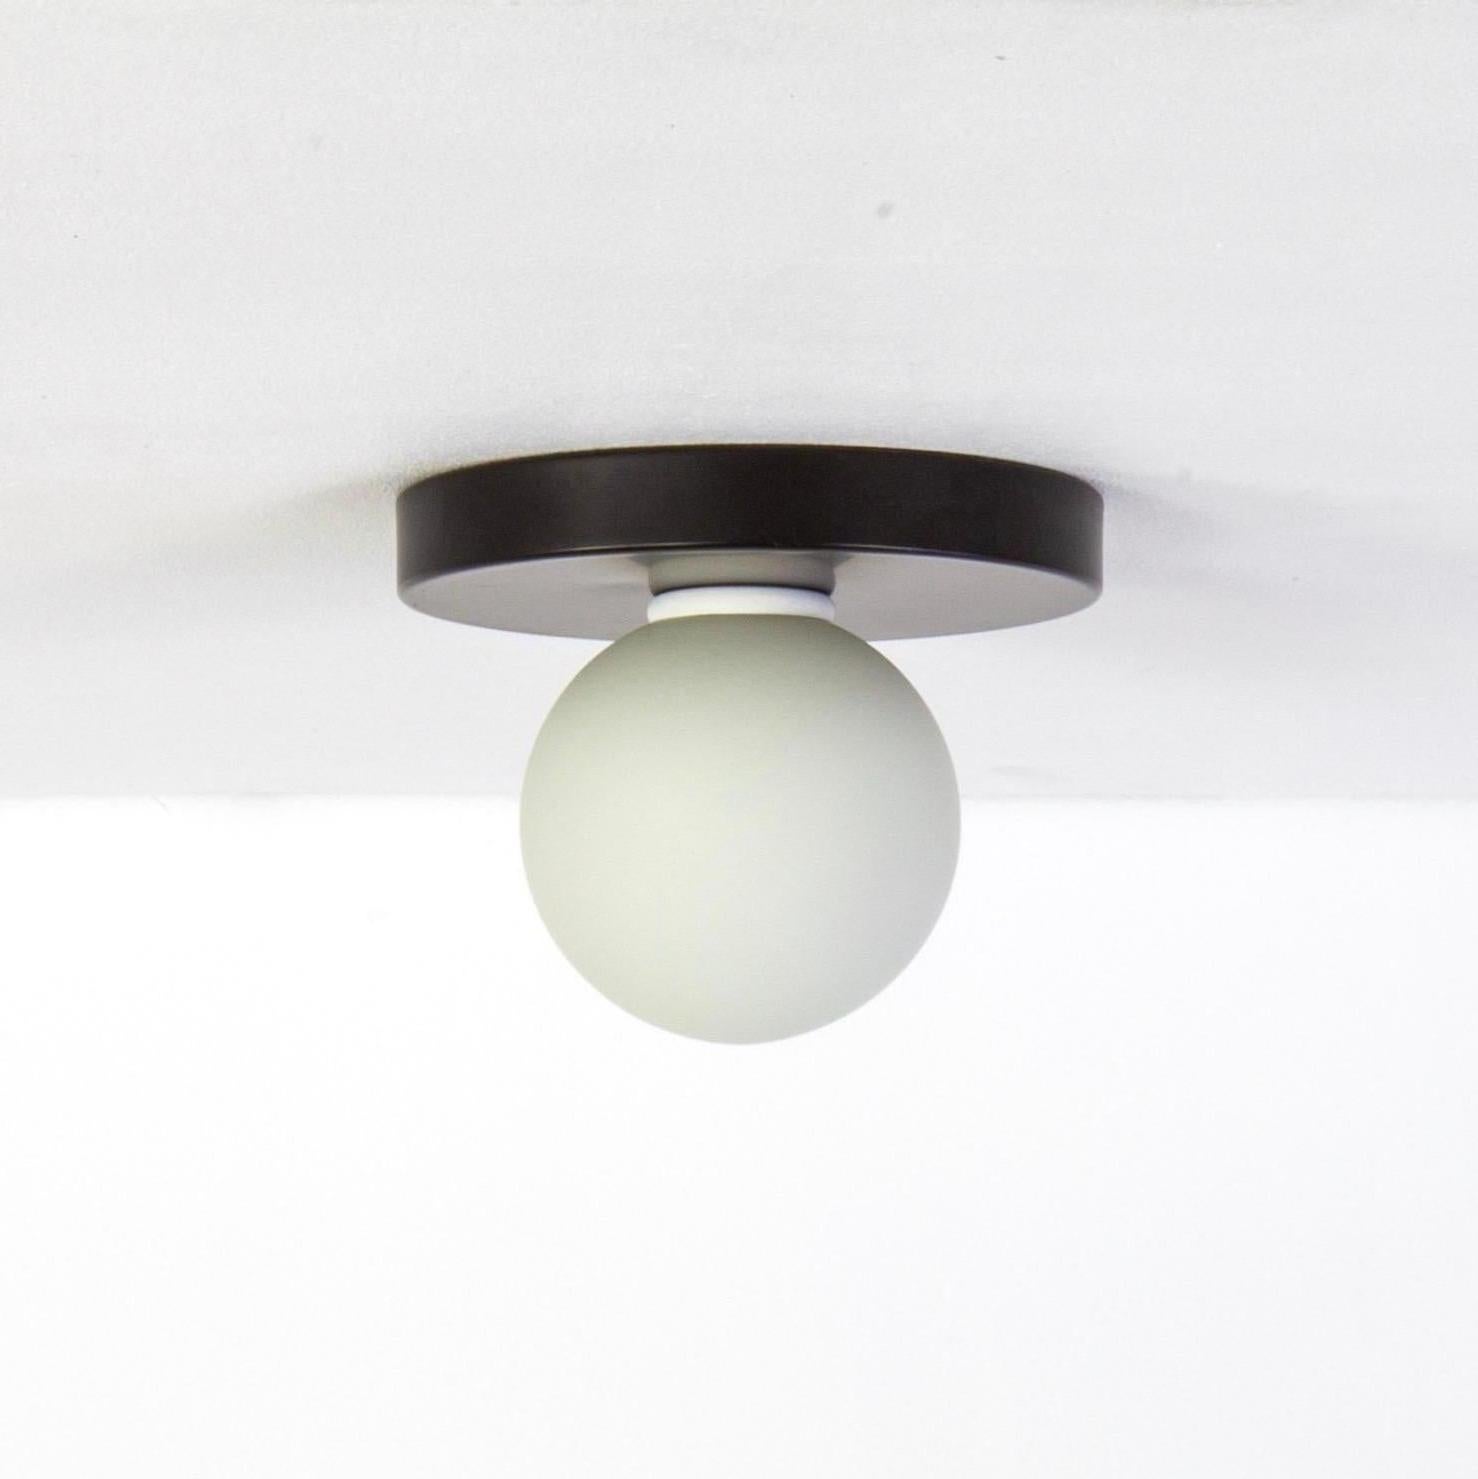 This listing is for 4x Globe Flush Mounts in black designed and manufactured by Research.Lighting.

Materials: Brass, Steel & Glass
Finish: Black
Electronics: 1x G9 Socket, 1x 4.5 Watt LED Bulb (included), 450 Lumens
ADA Compliant. UL Listed. Made